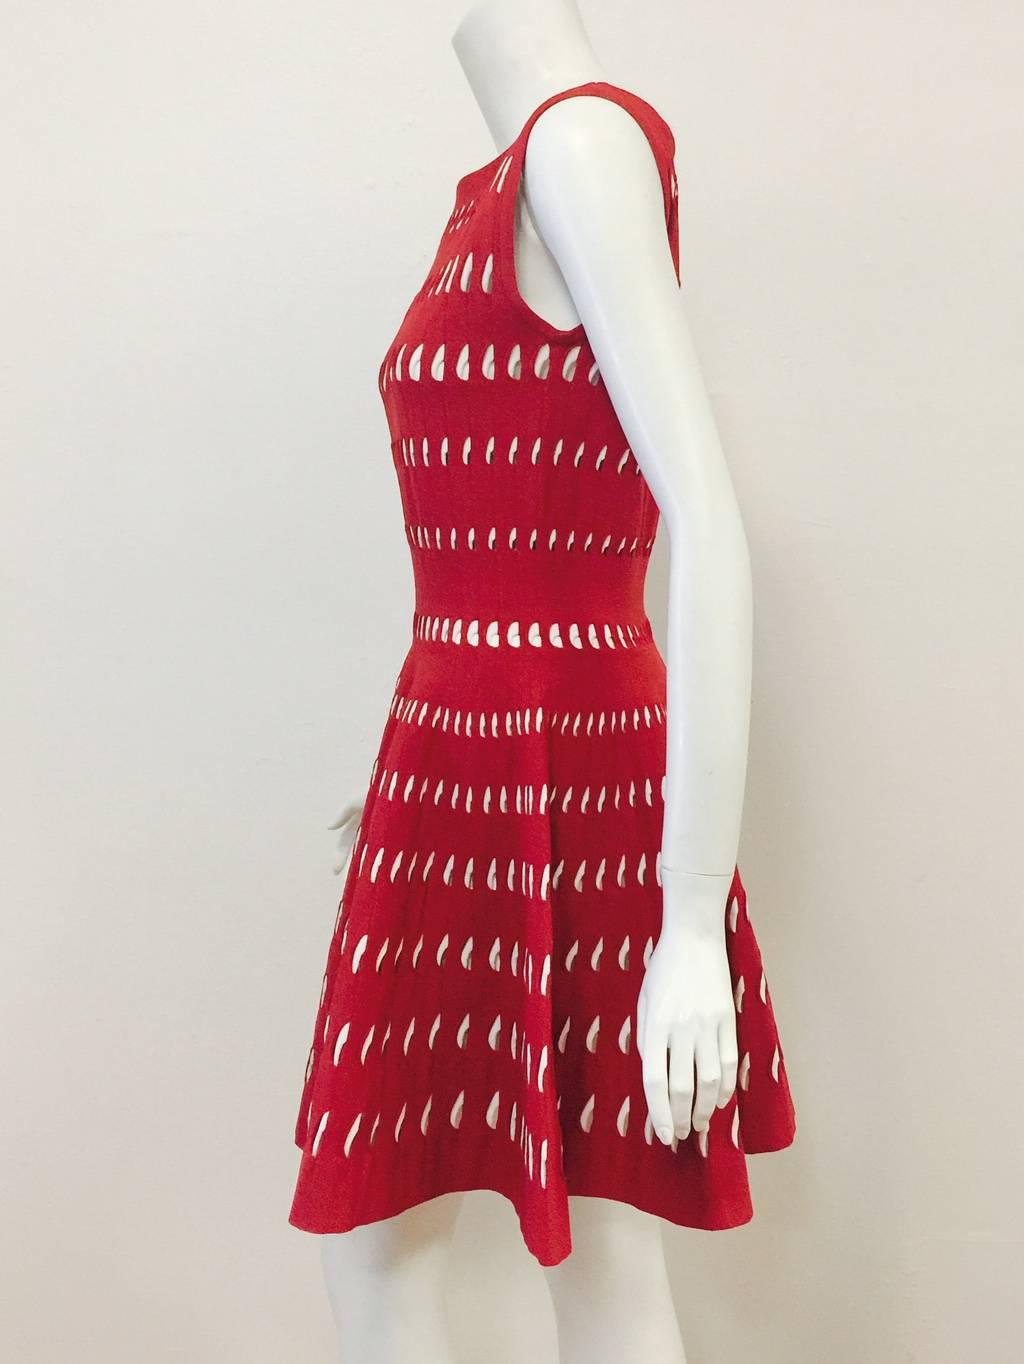 The Lady in Red prefers Alaia!  This Sleeveless Dress is typical Azzedine Alaia...classic, feminine, and seductive!  Utilizing technologically advanced 